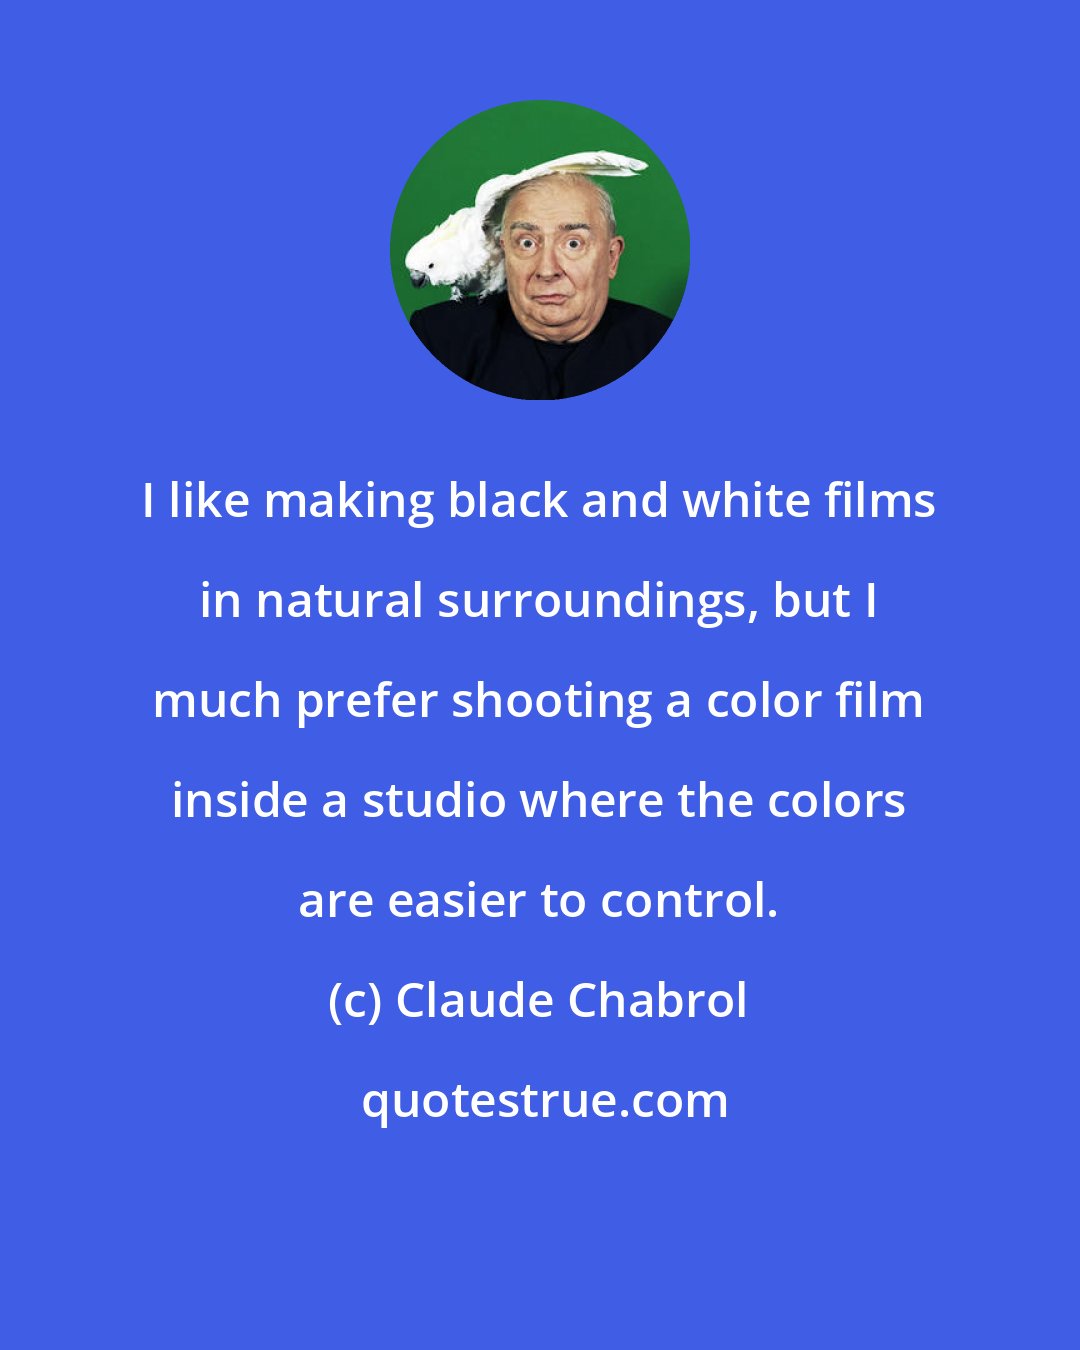 Claude Chabrol: I like making black and white films in natural surroundings, but I much prefer shooting a color film inside a studio where the colors are easier to control.